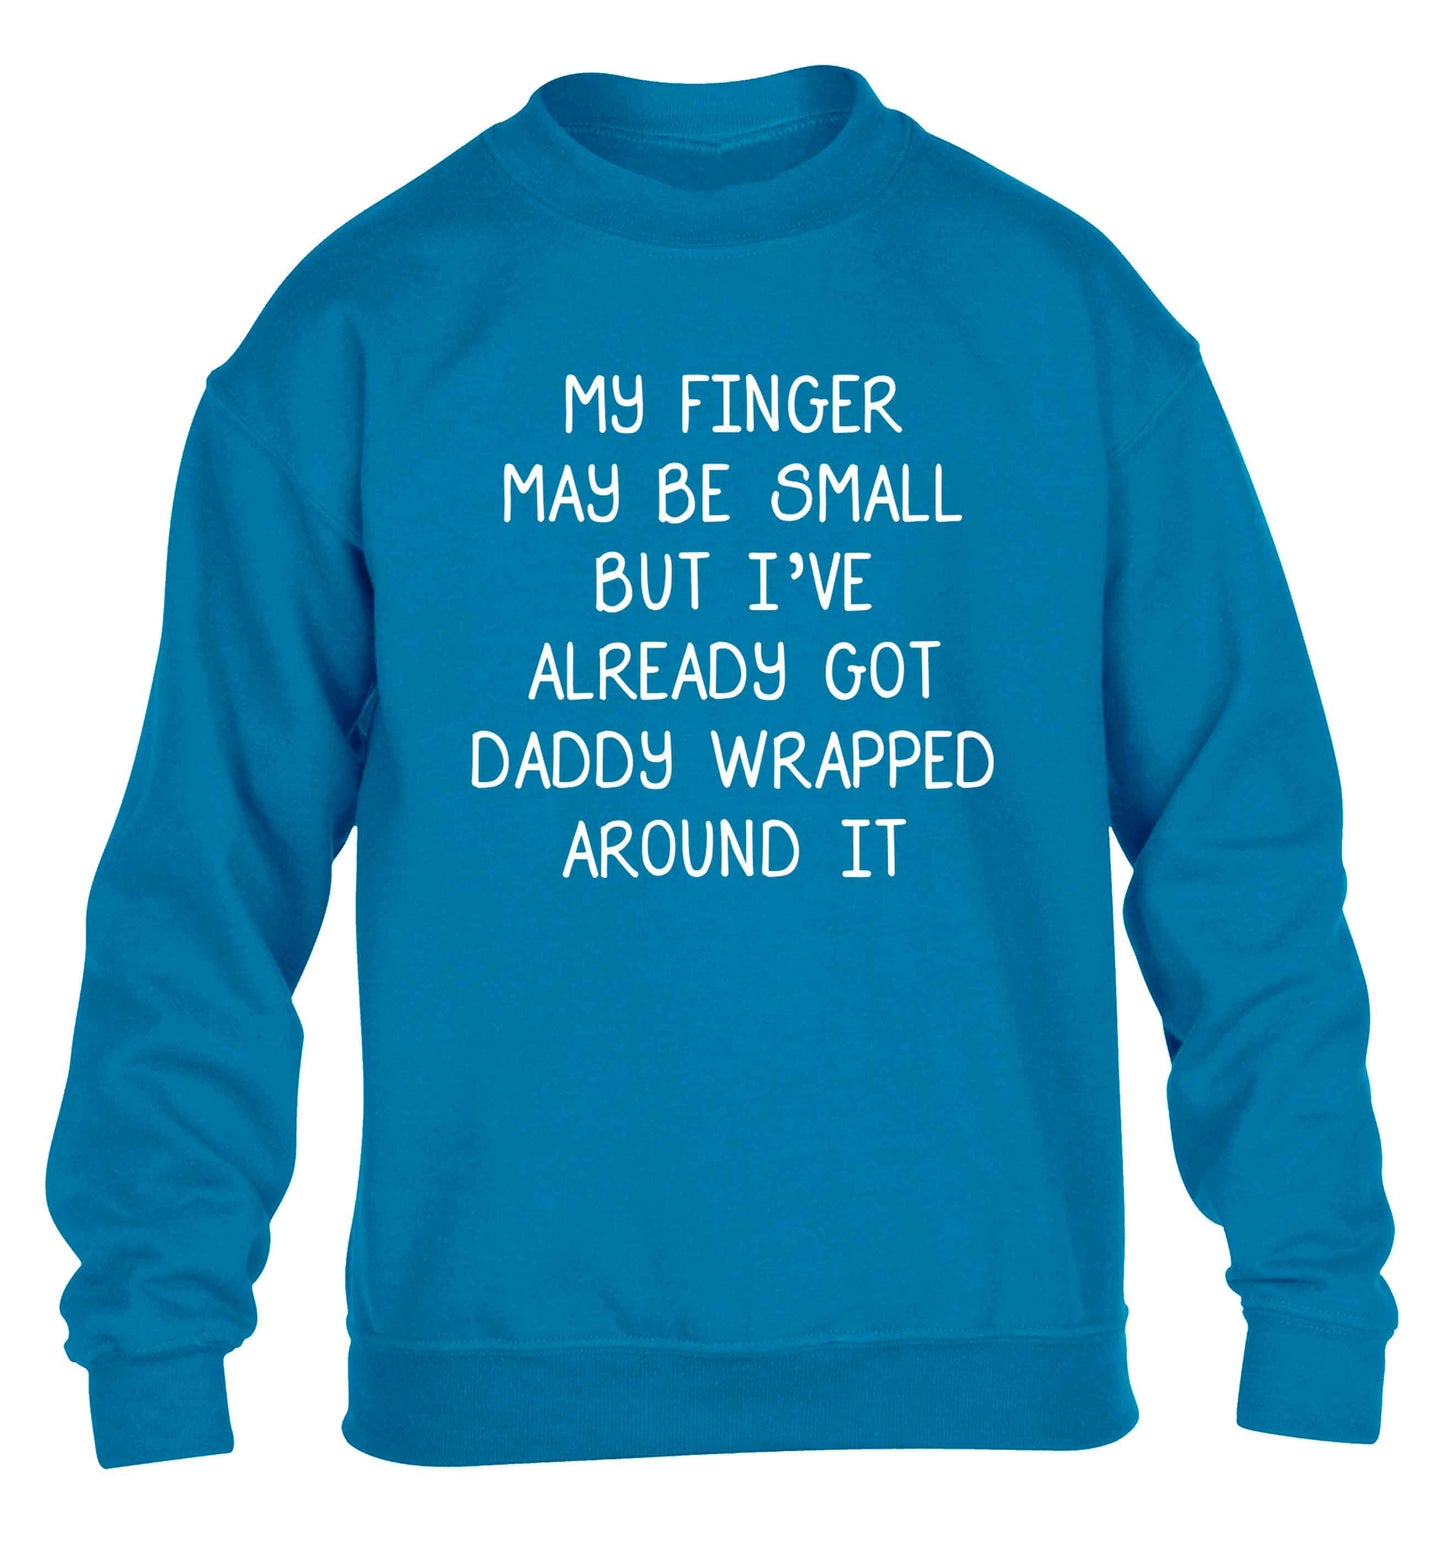 My finger may be small but I've already got daddy wrapped around it children's blue sweater 12-13 Years